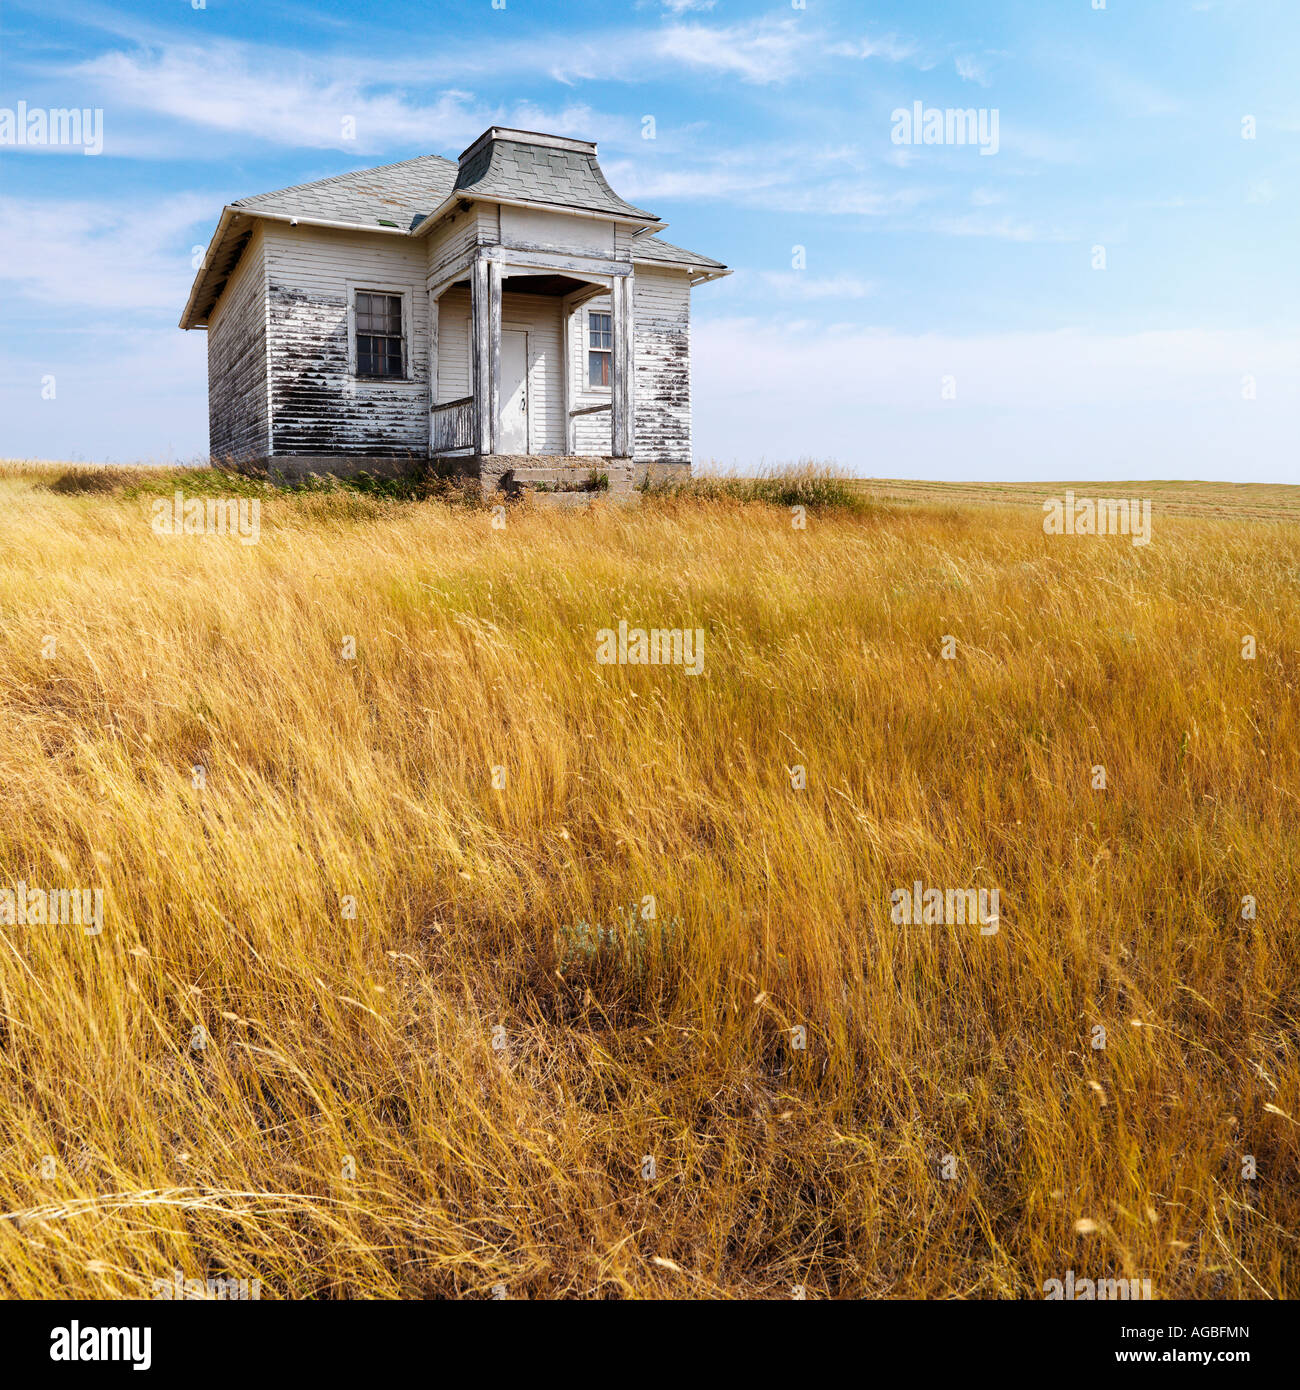 Weathered abandoned building in remote grassland Stock Photo